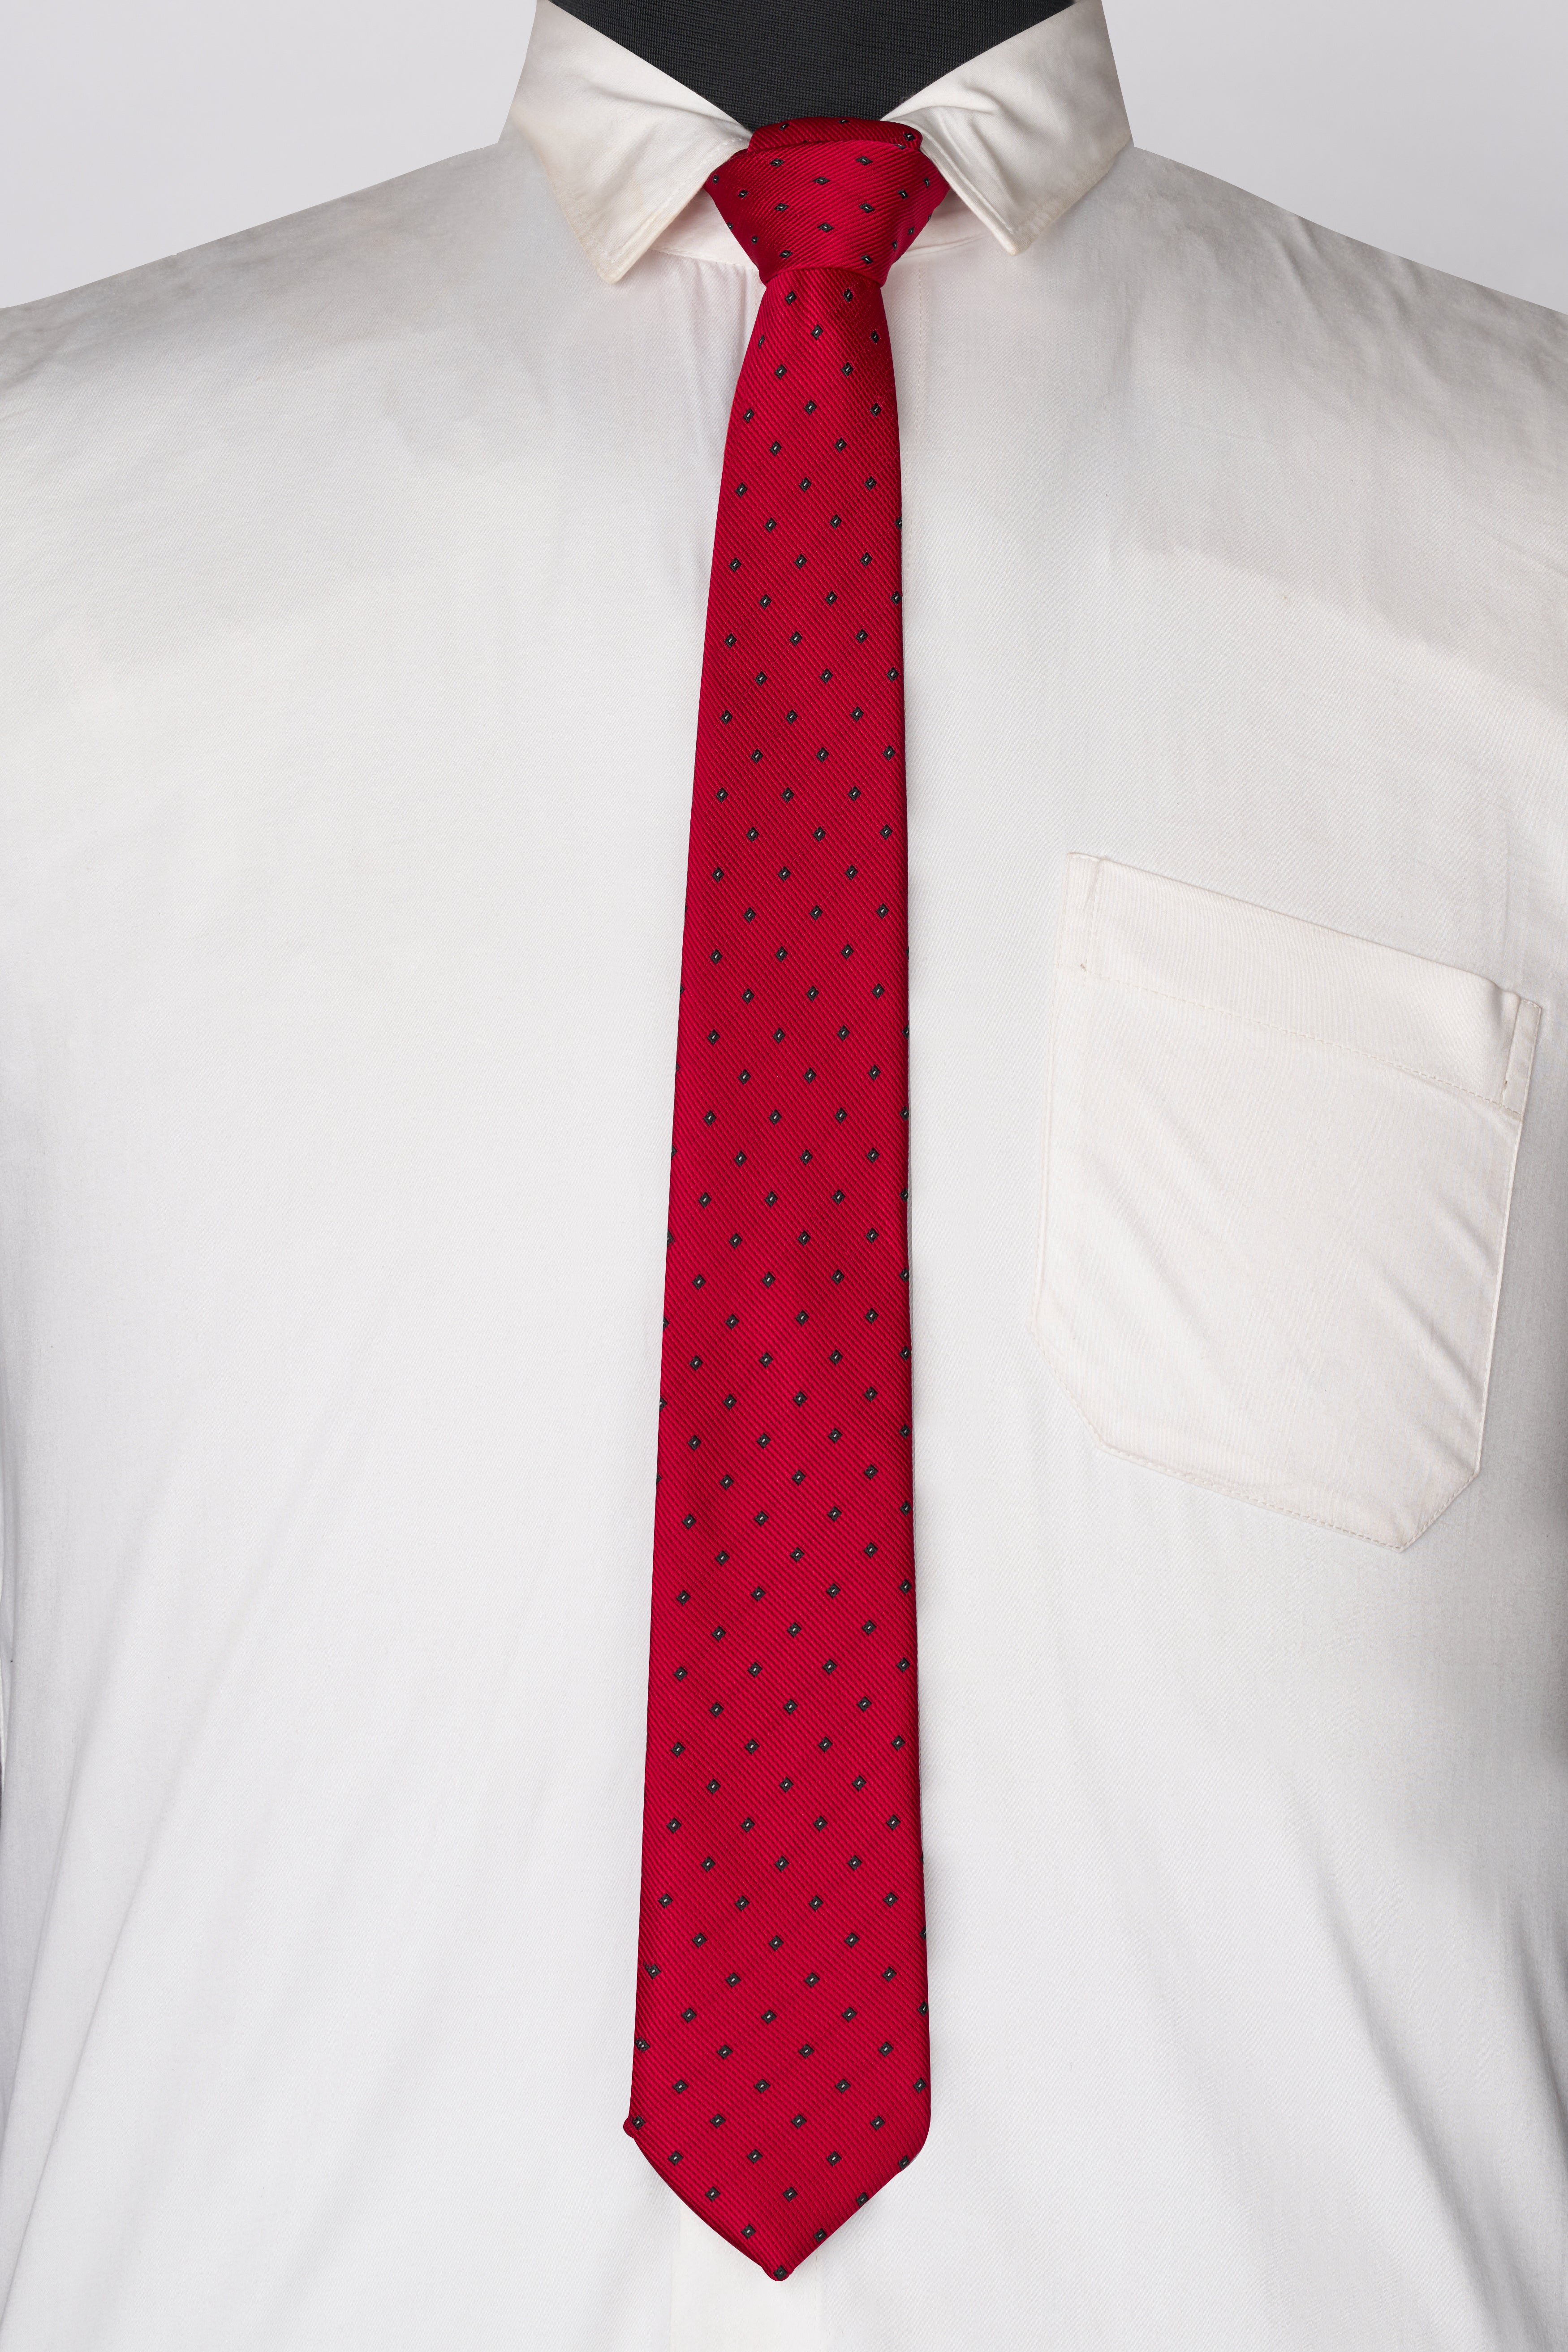 Scarlet Red with Black Jacquard Tie with Pocket Square TP063